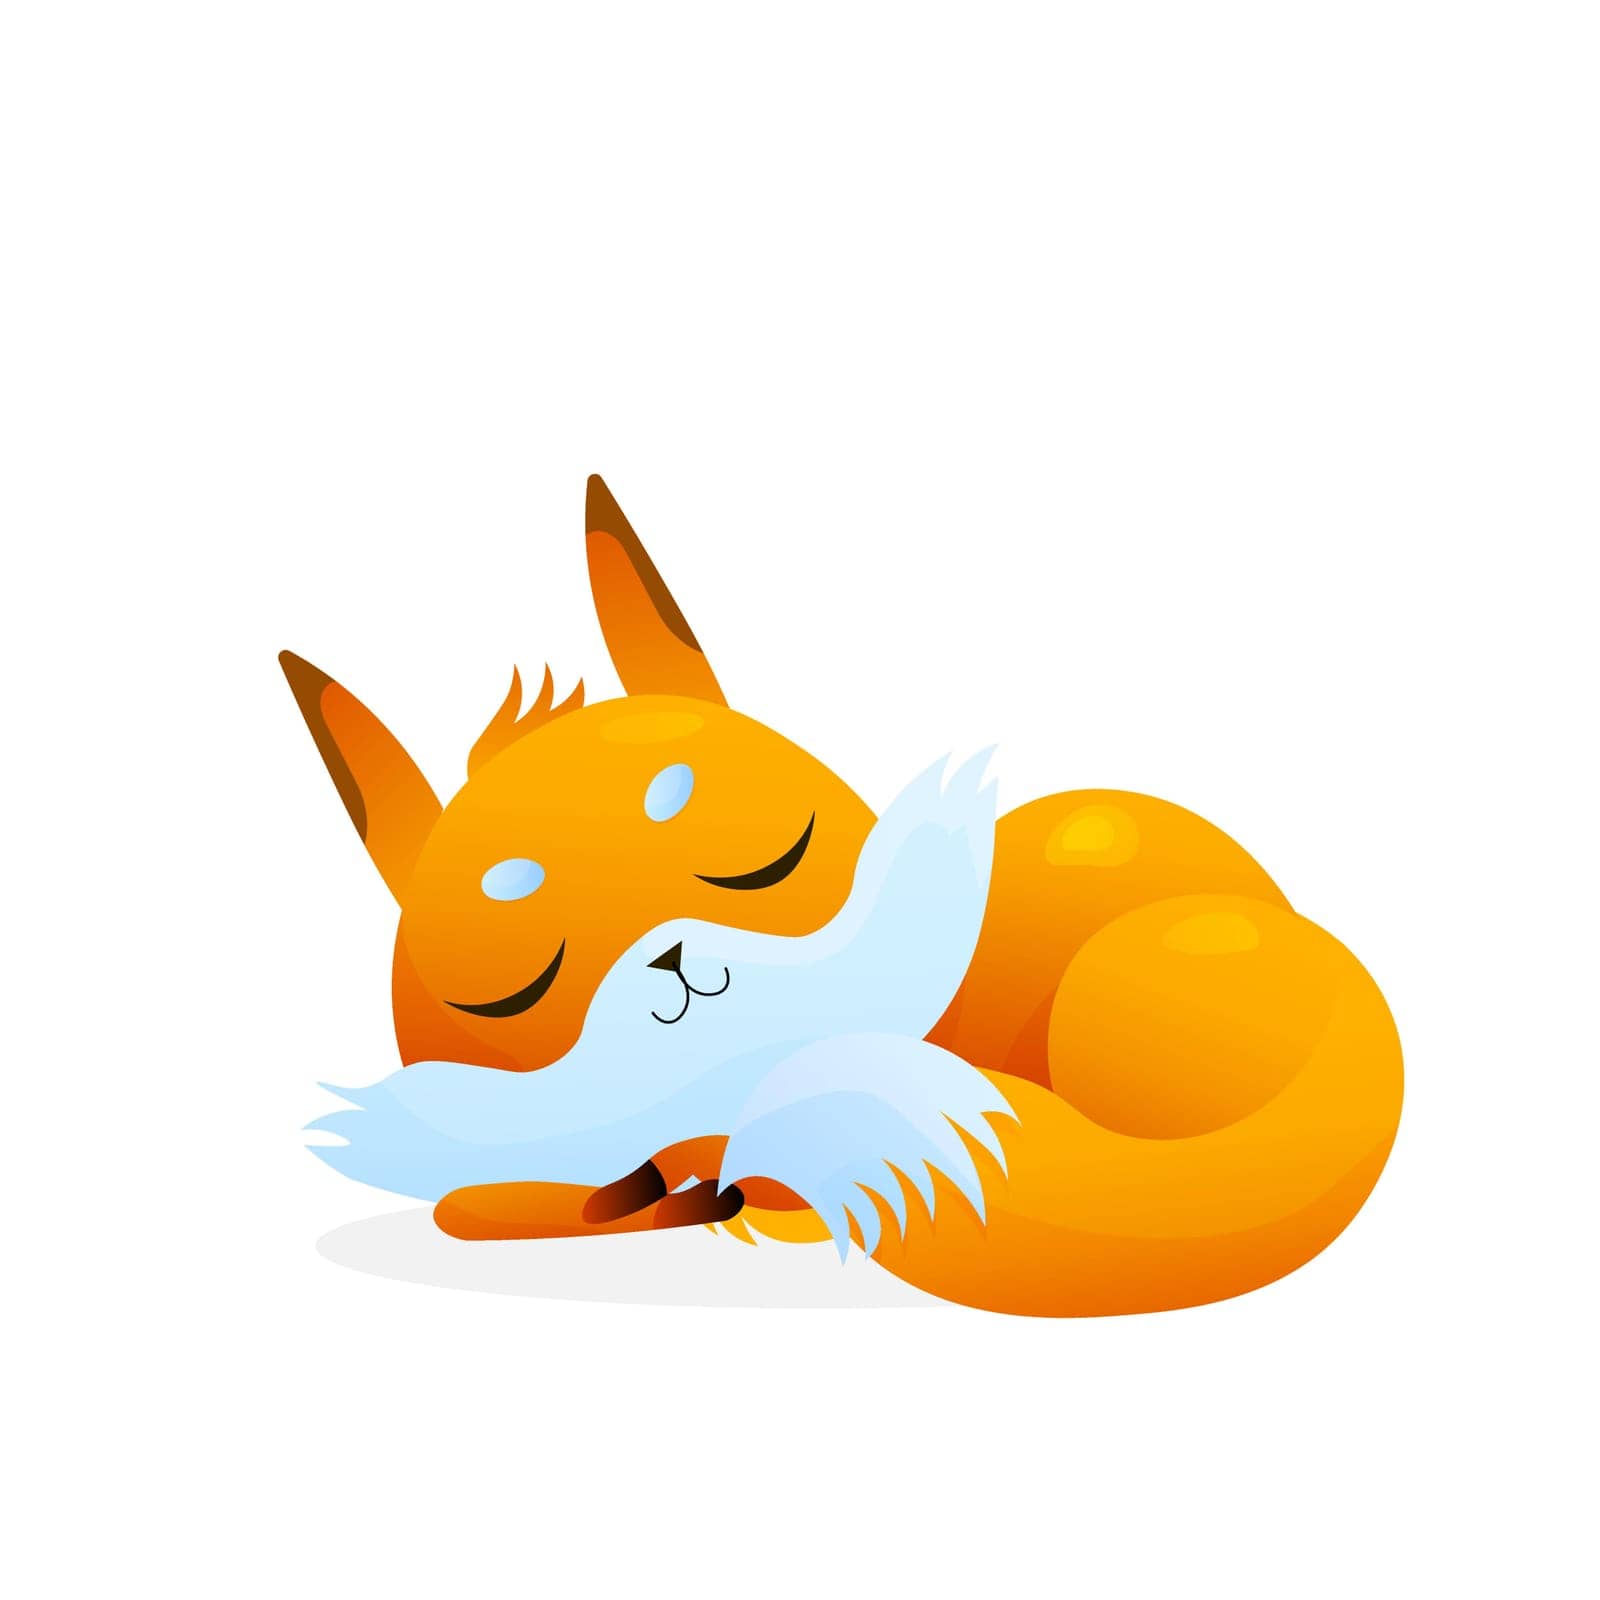 Cute cartoon slepping fox on white background. For nature concepts, children s books illustrating, printing materials Vector illustration with simple gradients. EPS by Alxyzt